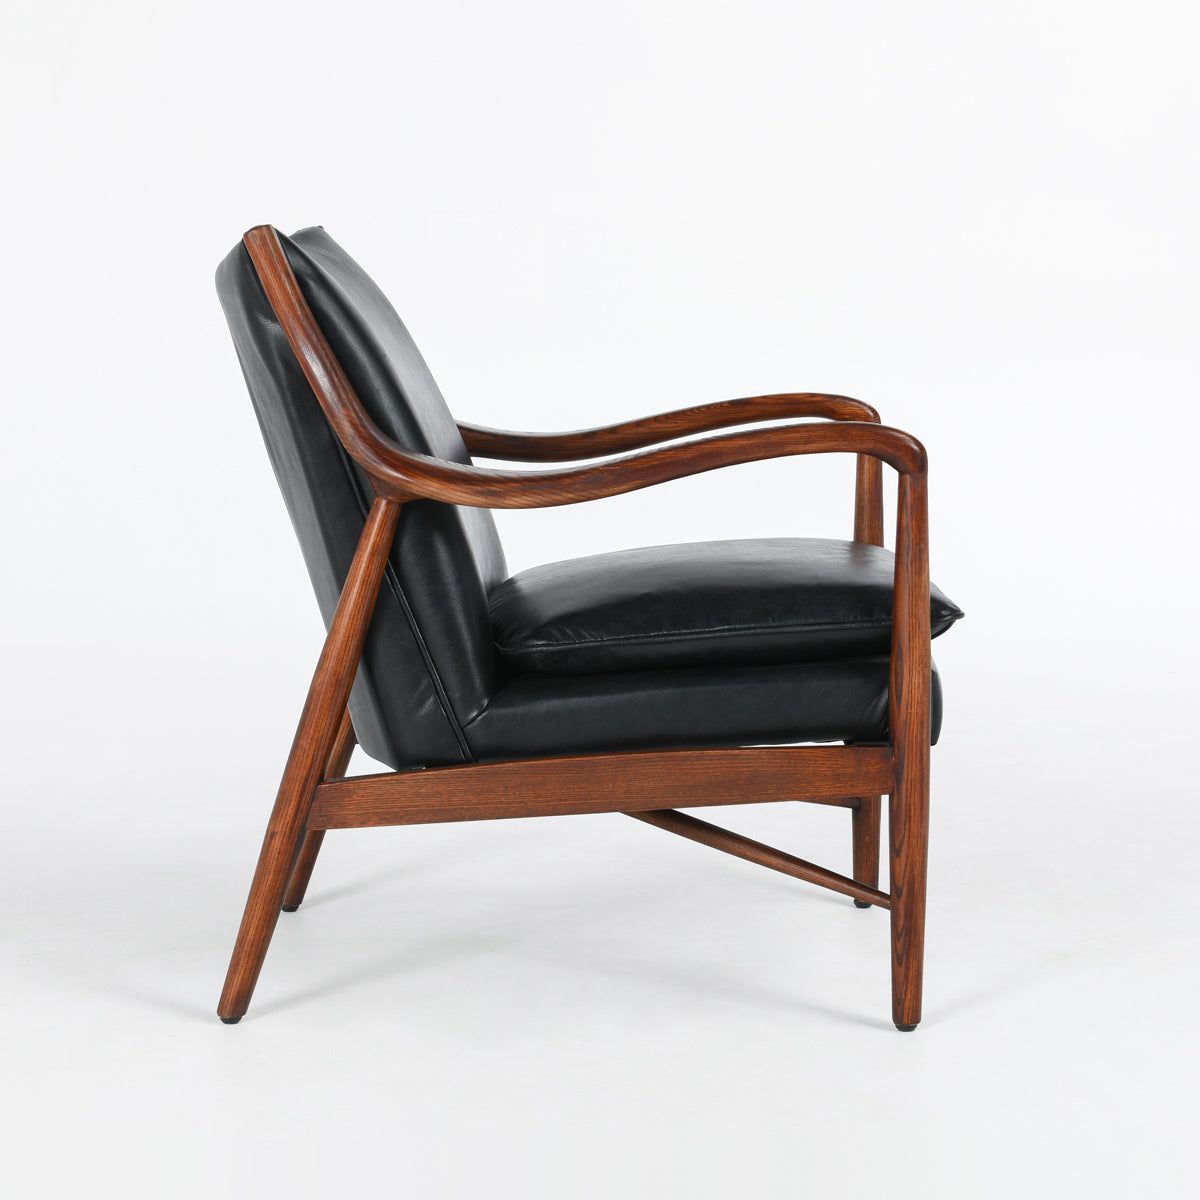 A modern walnut Benson Mid-Century Leather Accent Chair with a curved frame and genuine black leather cushioning. The chair features smooth, flowing wooden arms and legs in a rich, dark brown finish, providing both elegance and comfort. Set against a plain white background.